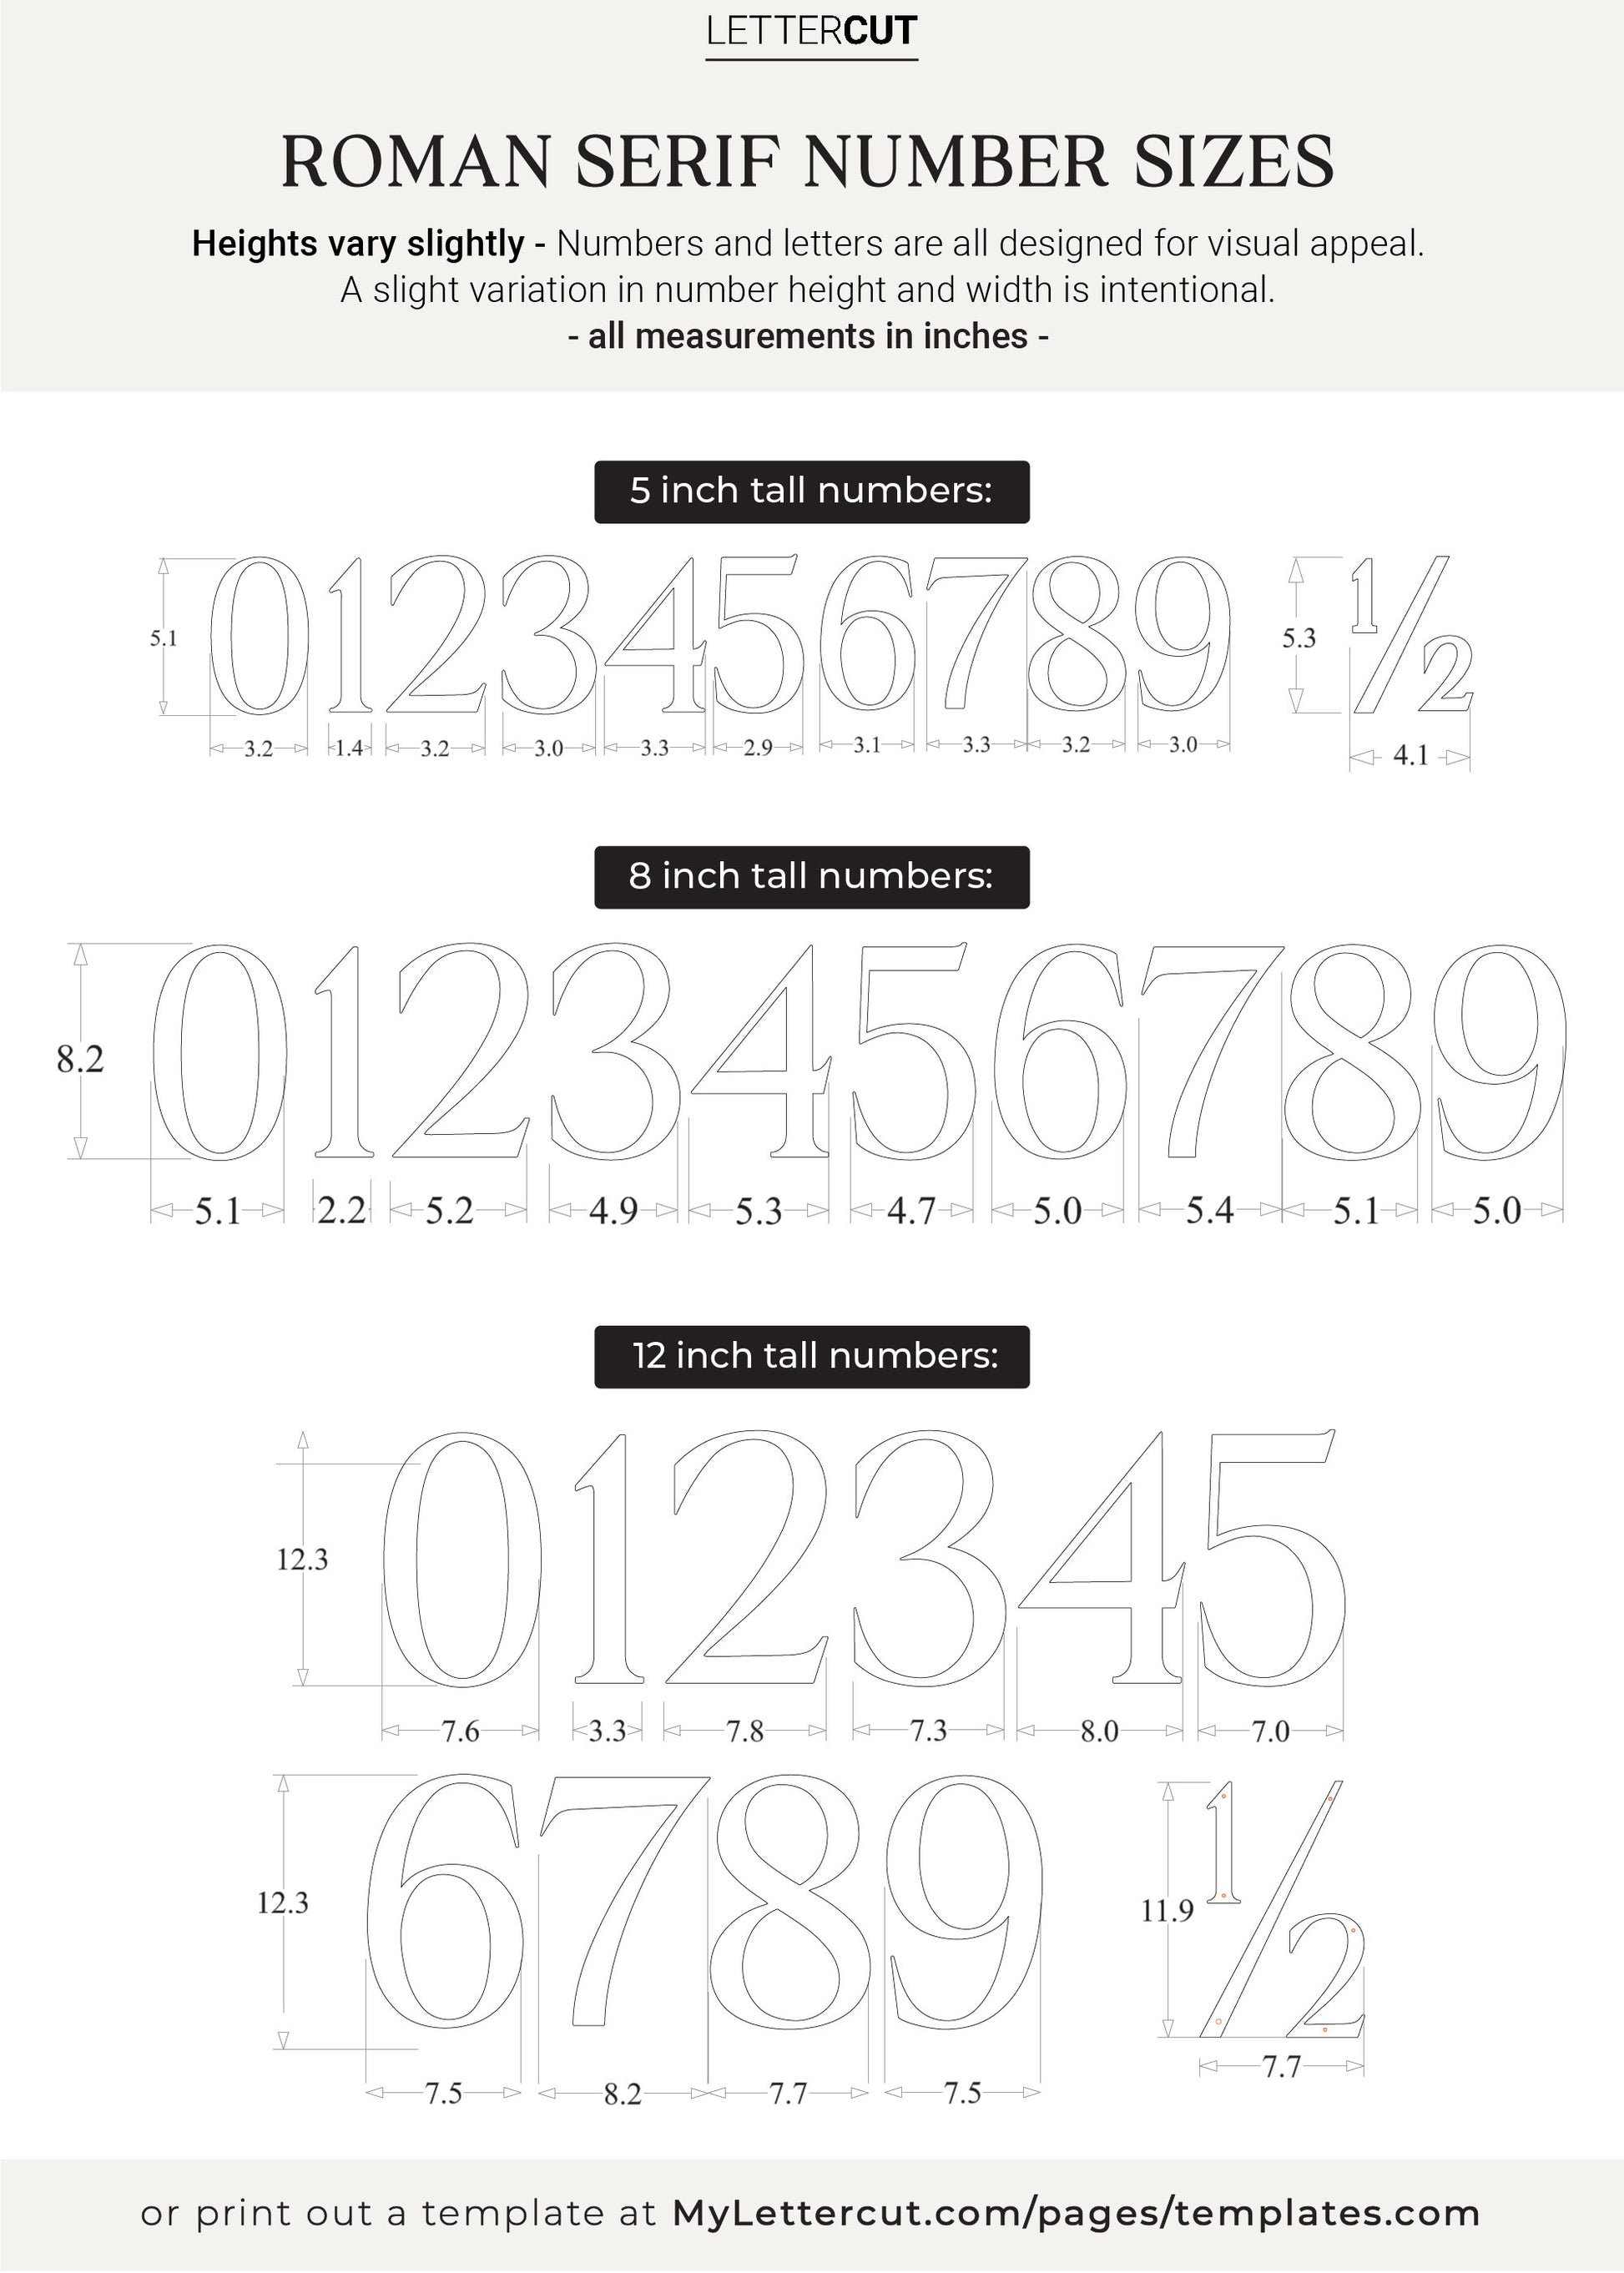 ROMAN SERIF number sizes and measurements